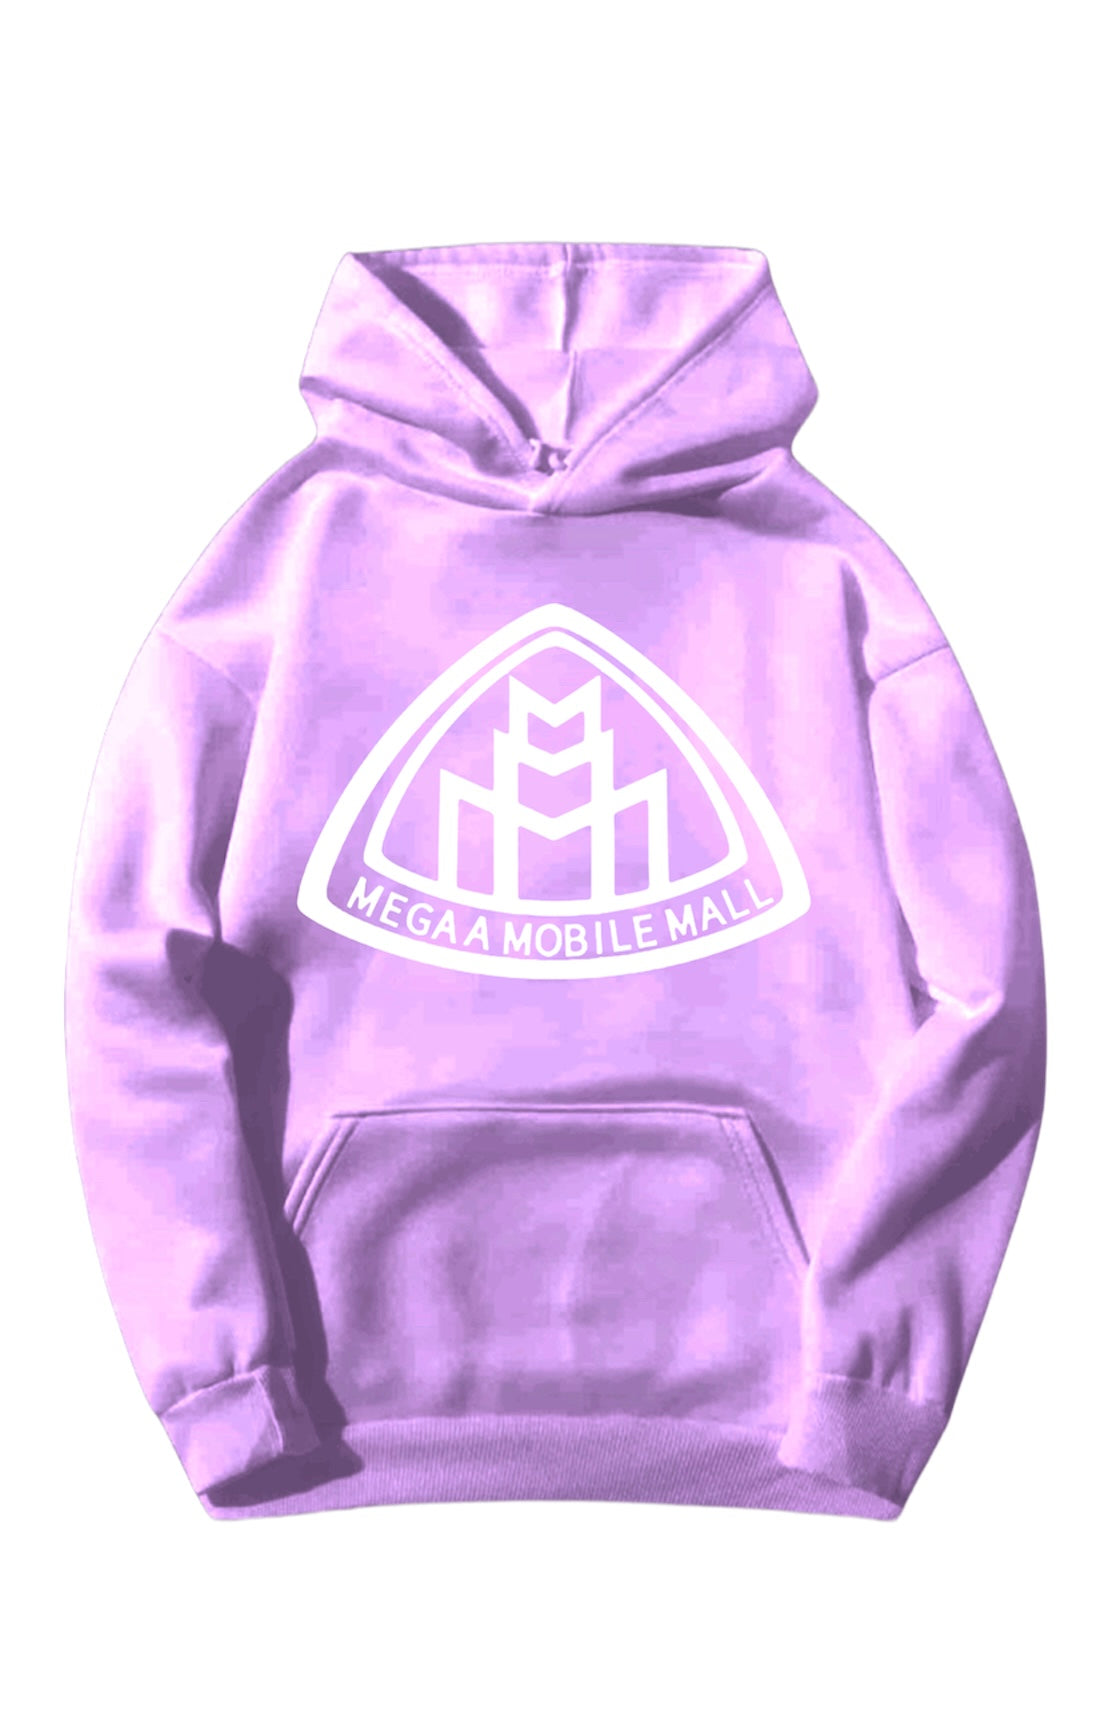 lilac megaamobilemall logo Heavy Blend Fleece Hoodie with white logo